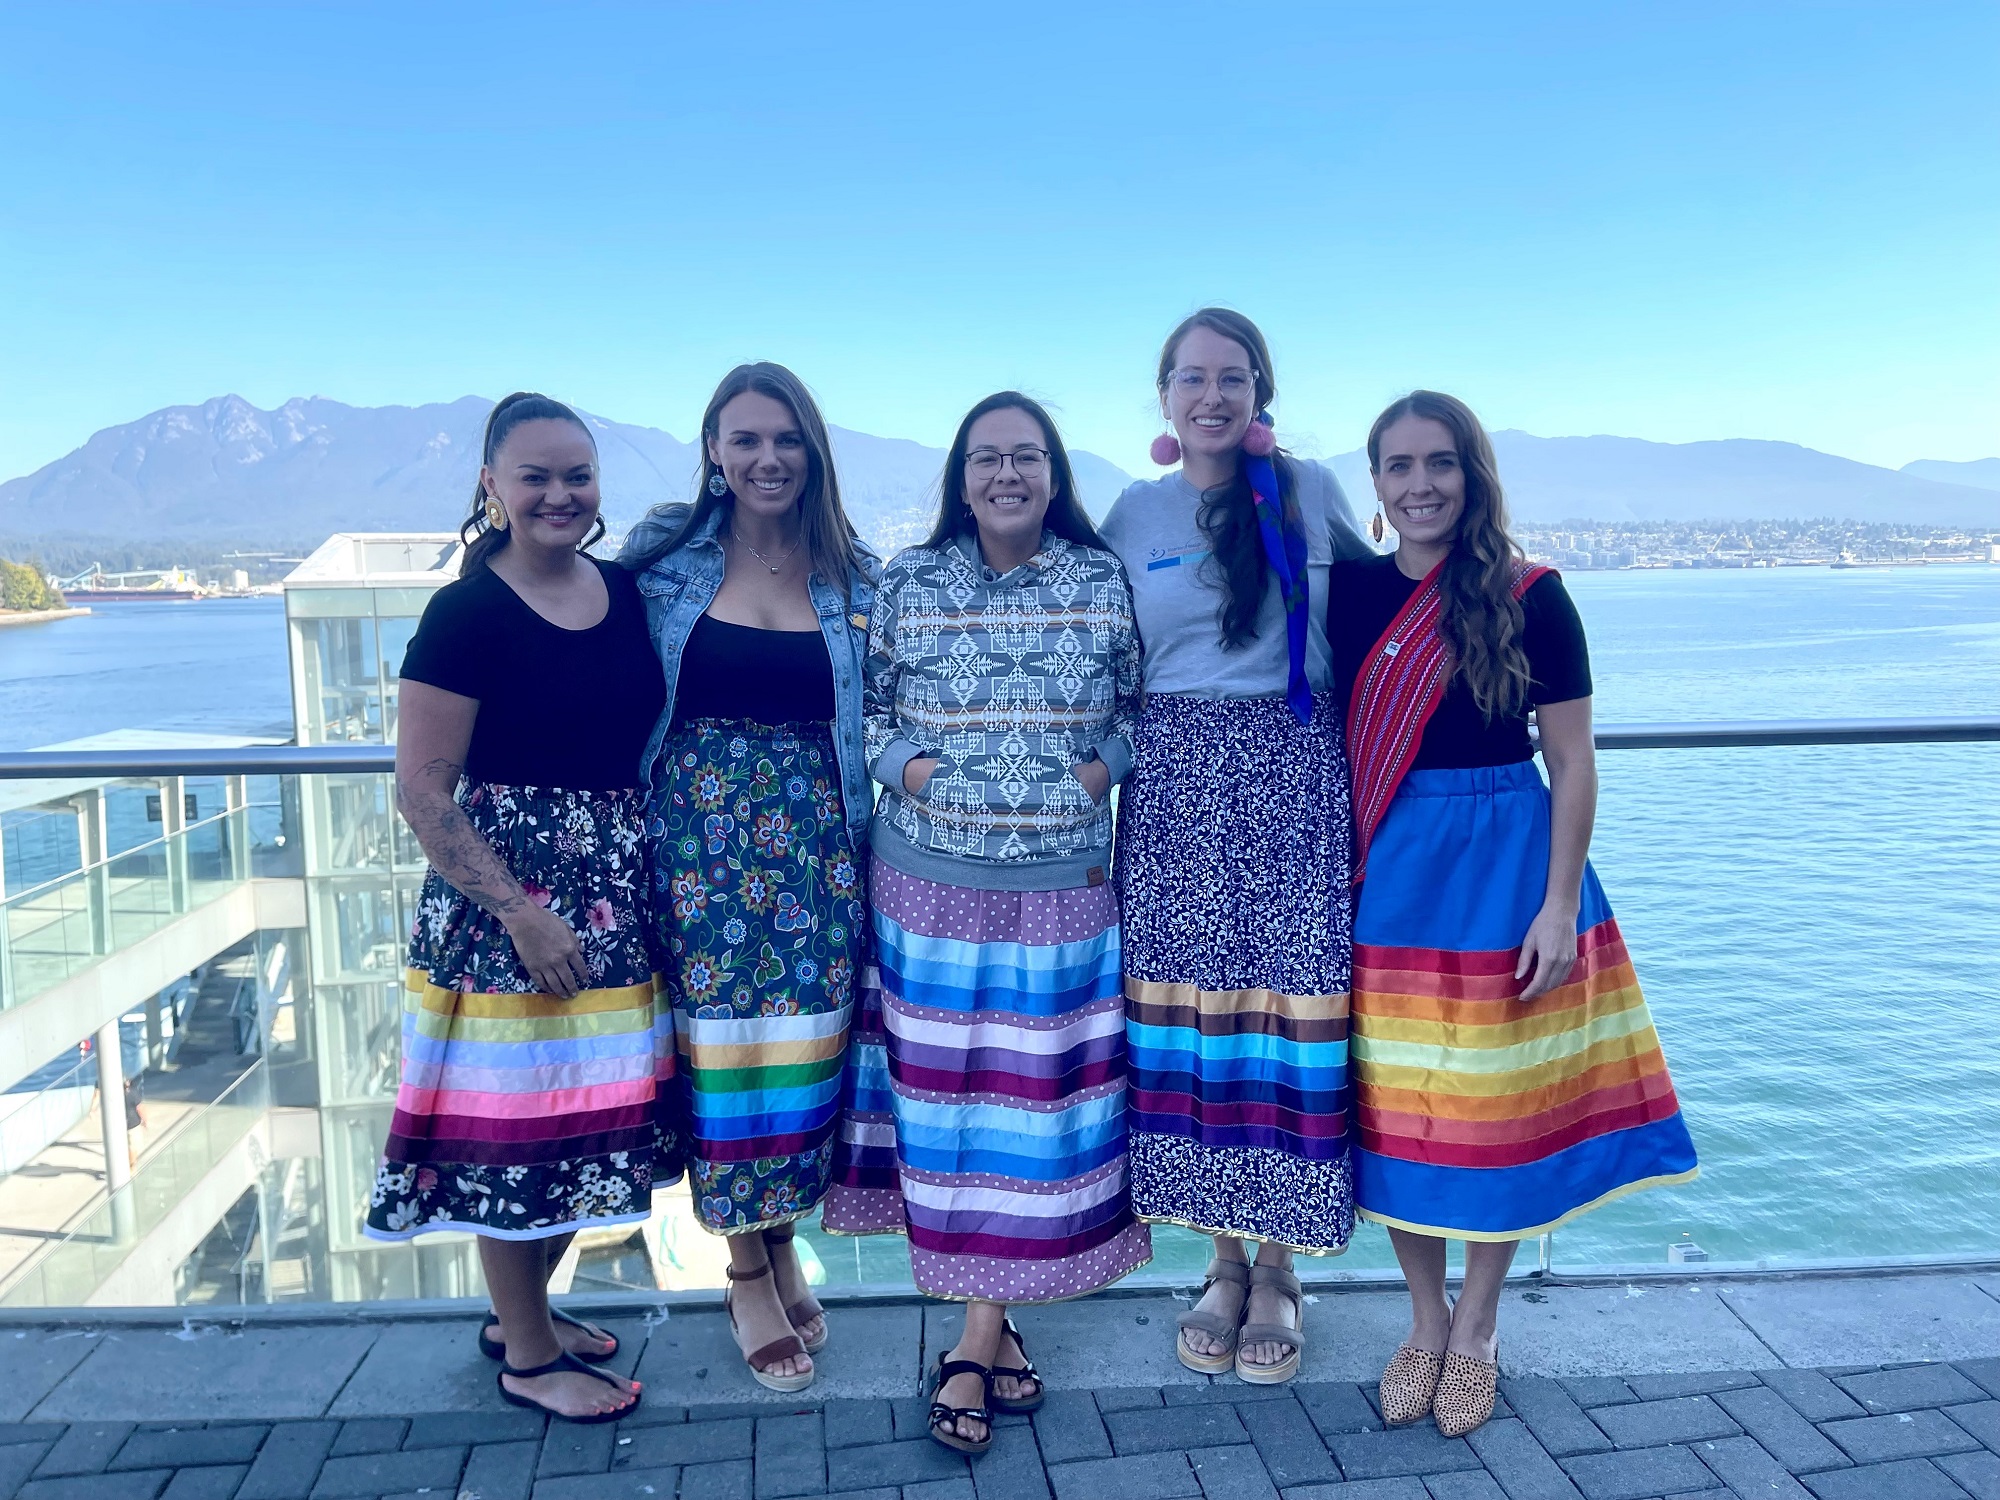 A group of women in ribbon skirts posing for a picture on a balcony with a view of the ocean and mountains behind them.